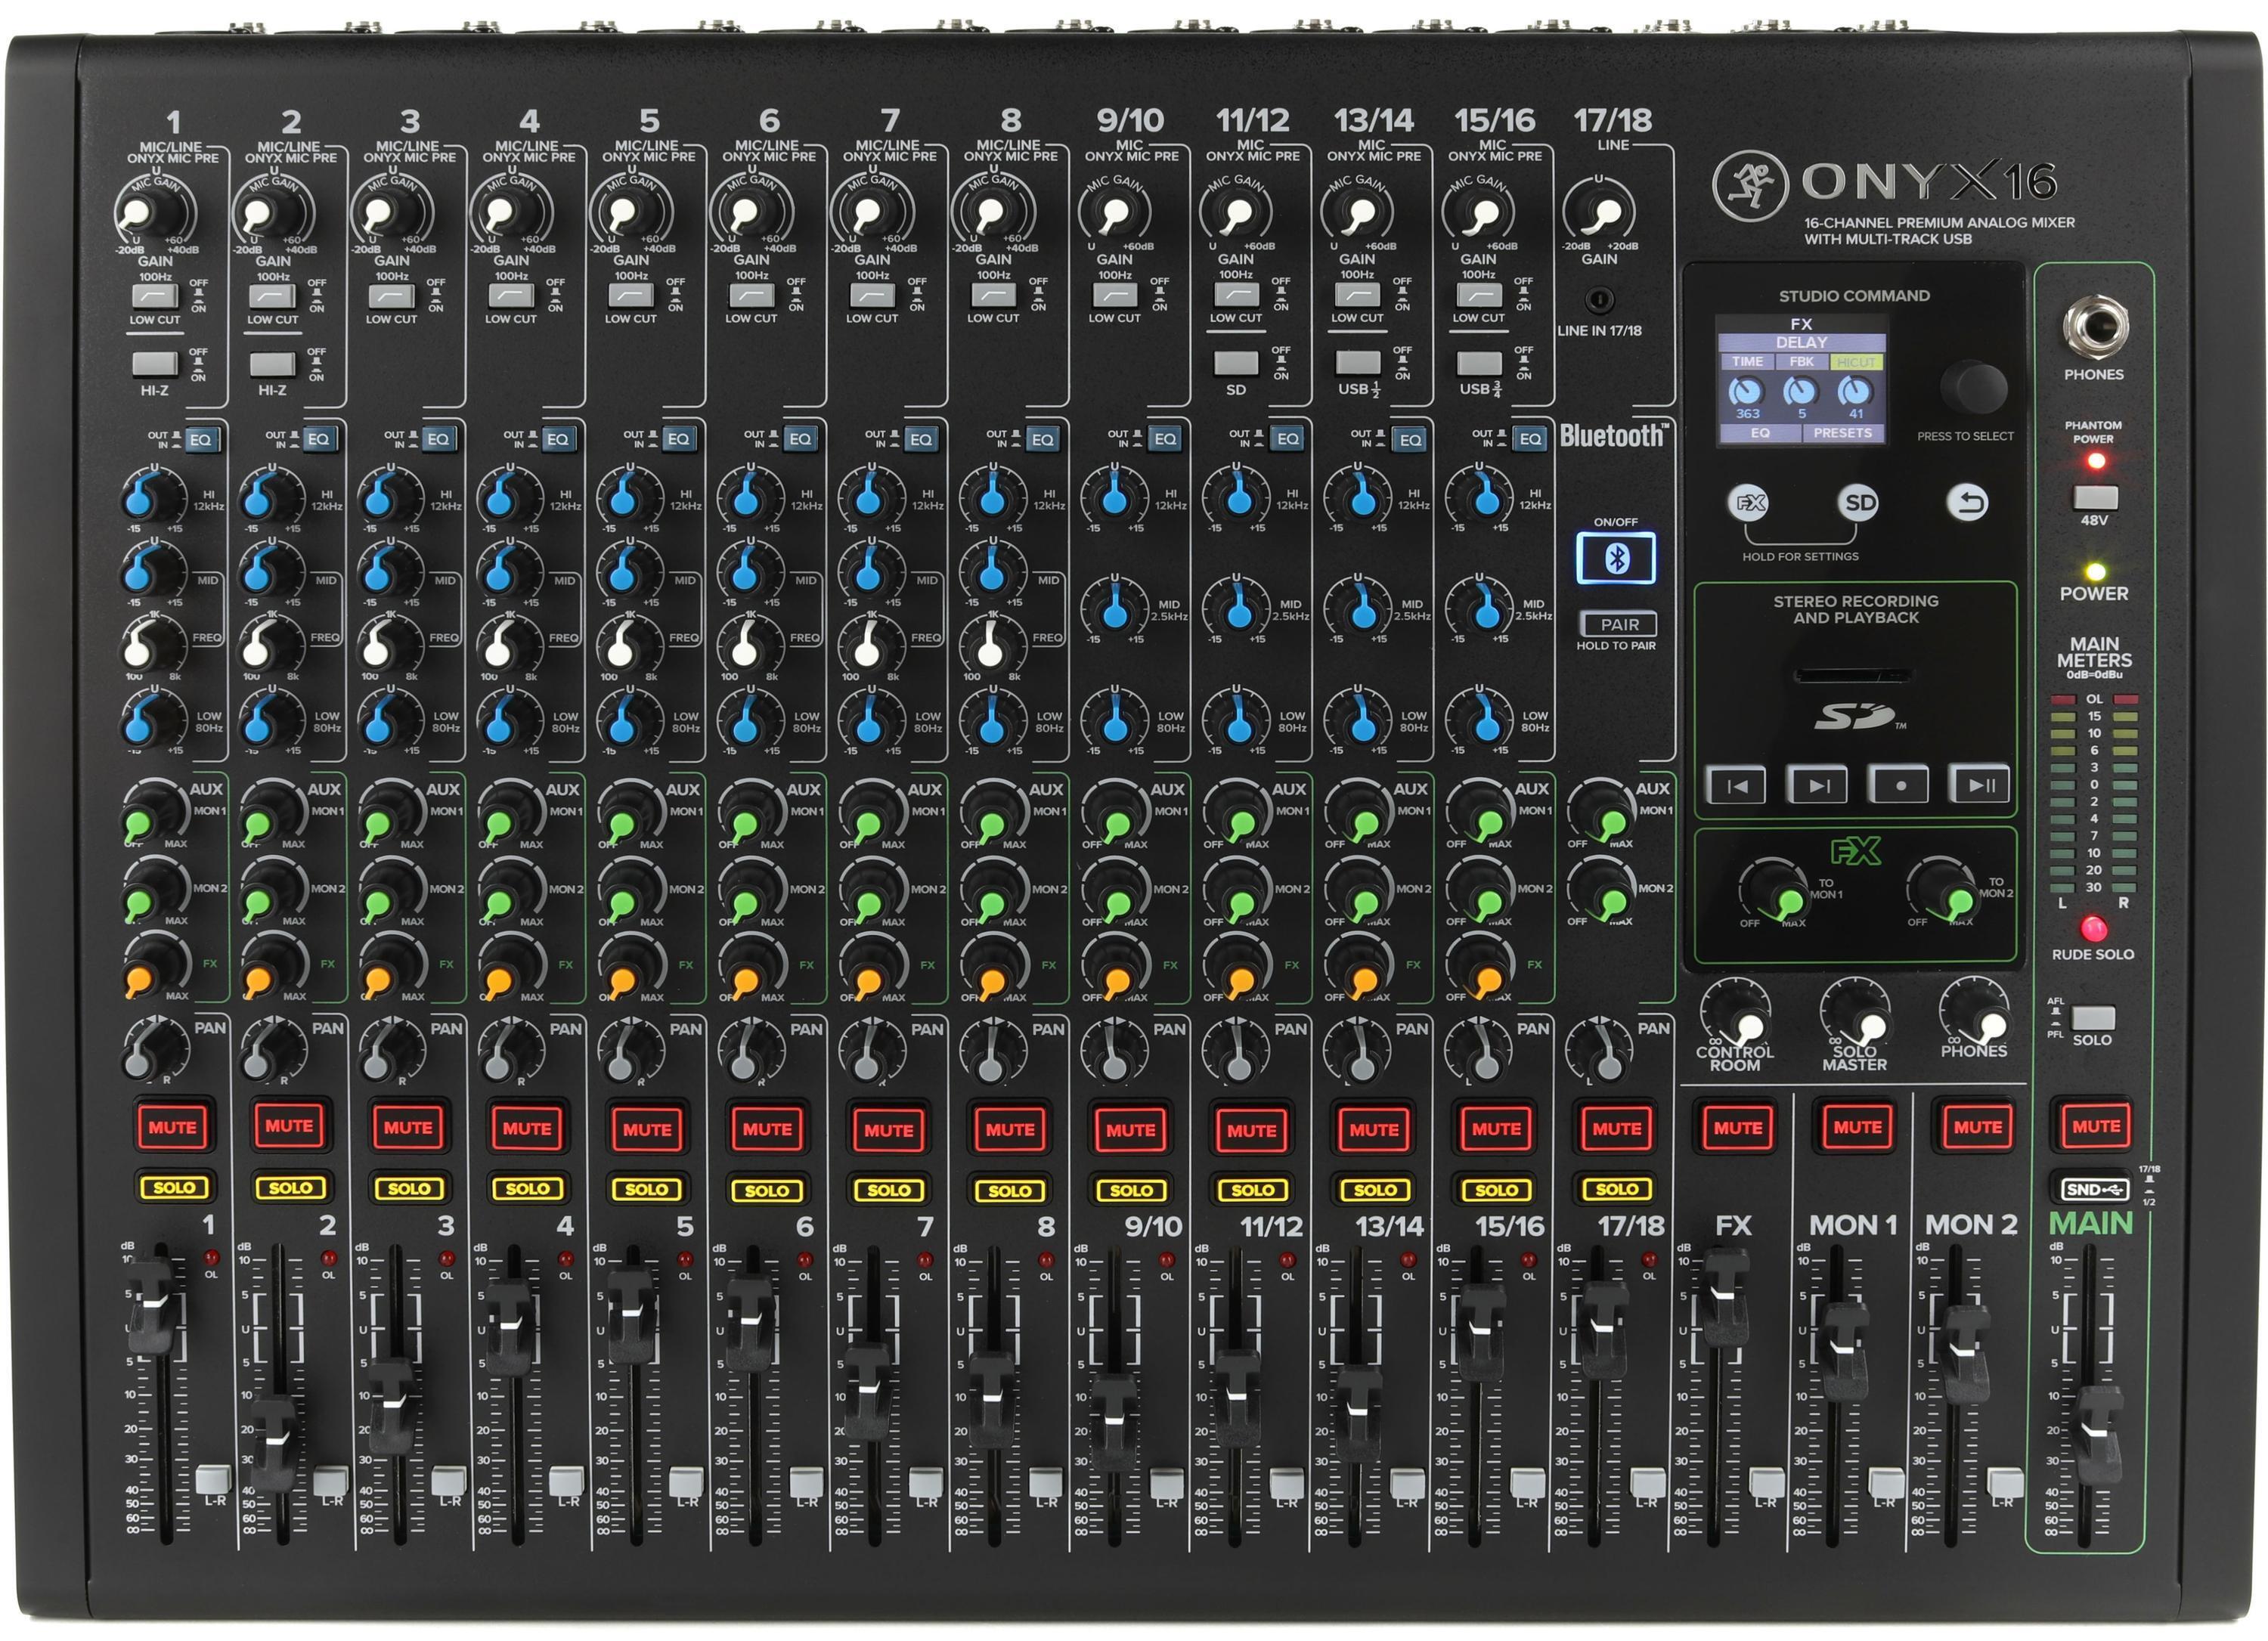 Mackie ONYX24 24-Channel Analog Mixer with Multitrack USB - Sound  Productions